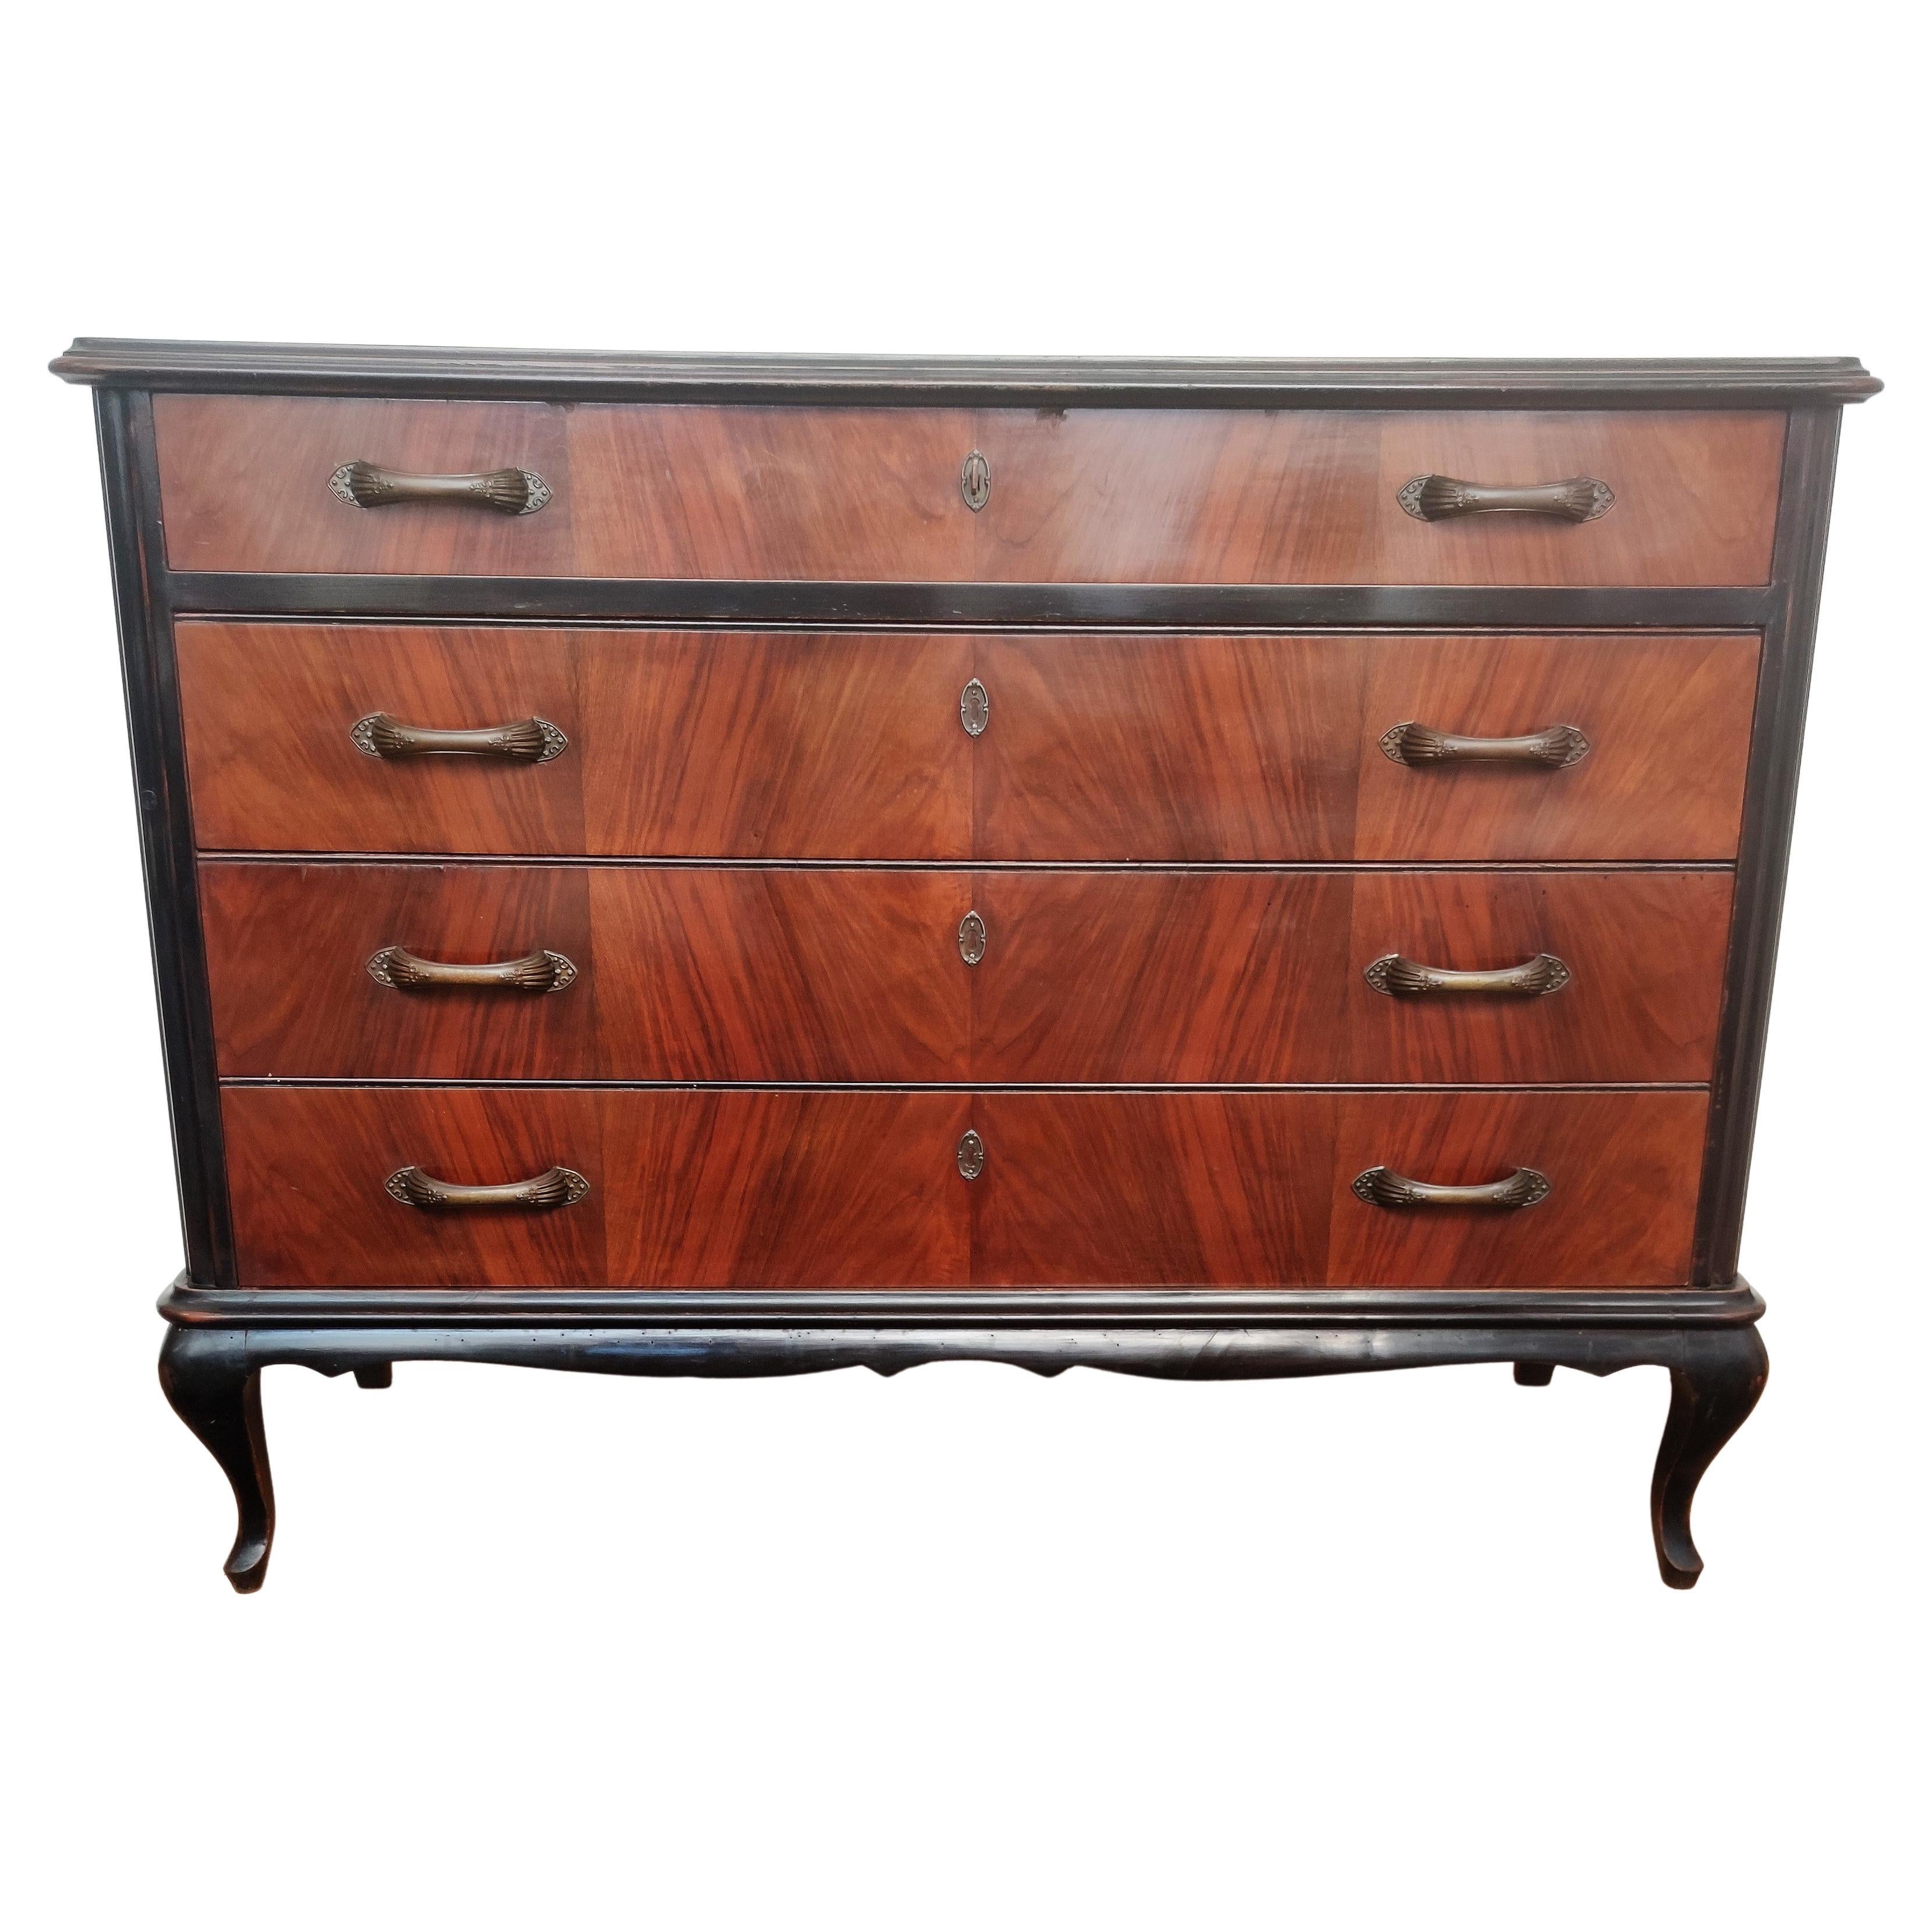 Italian Mid-Century Modern Wood and Brass Commode Dresser Chest of 4 Drawers For Sale